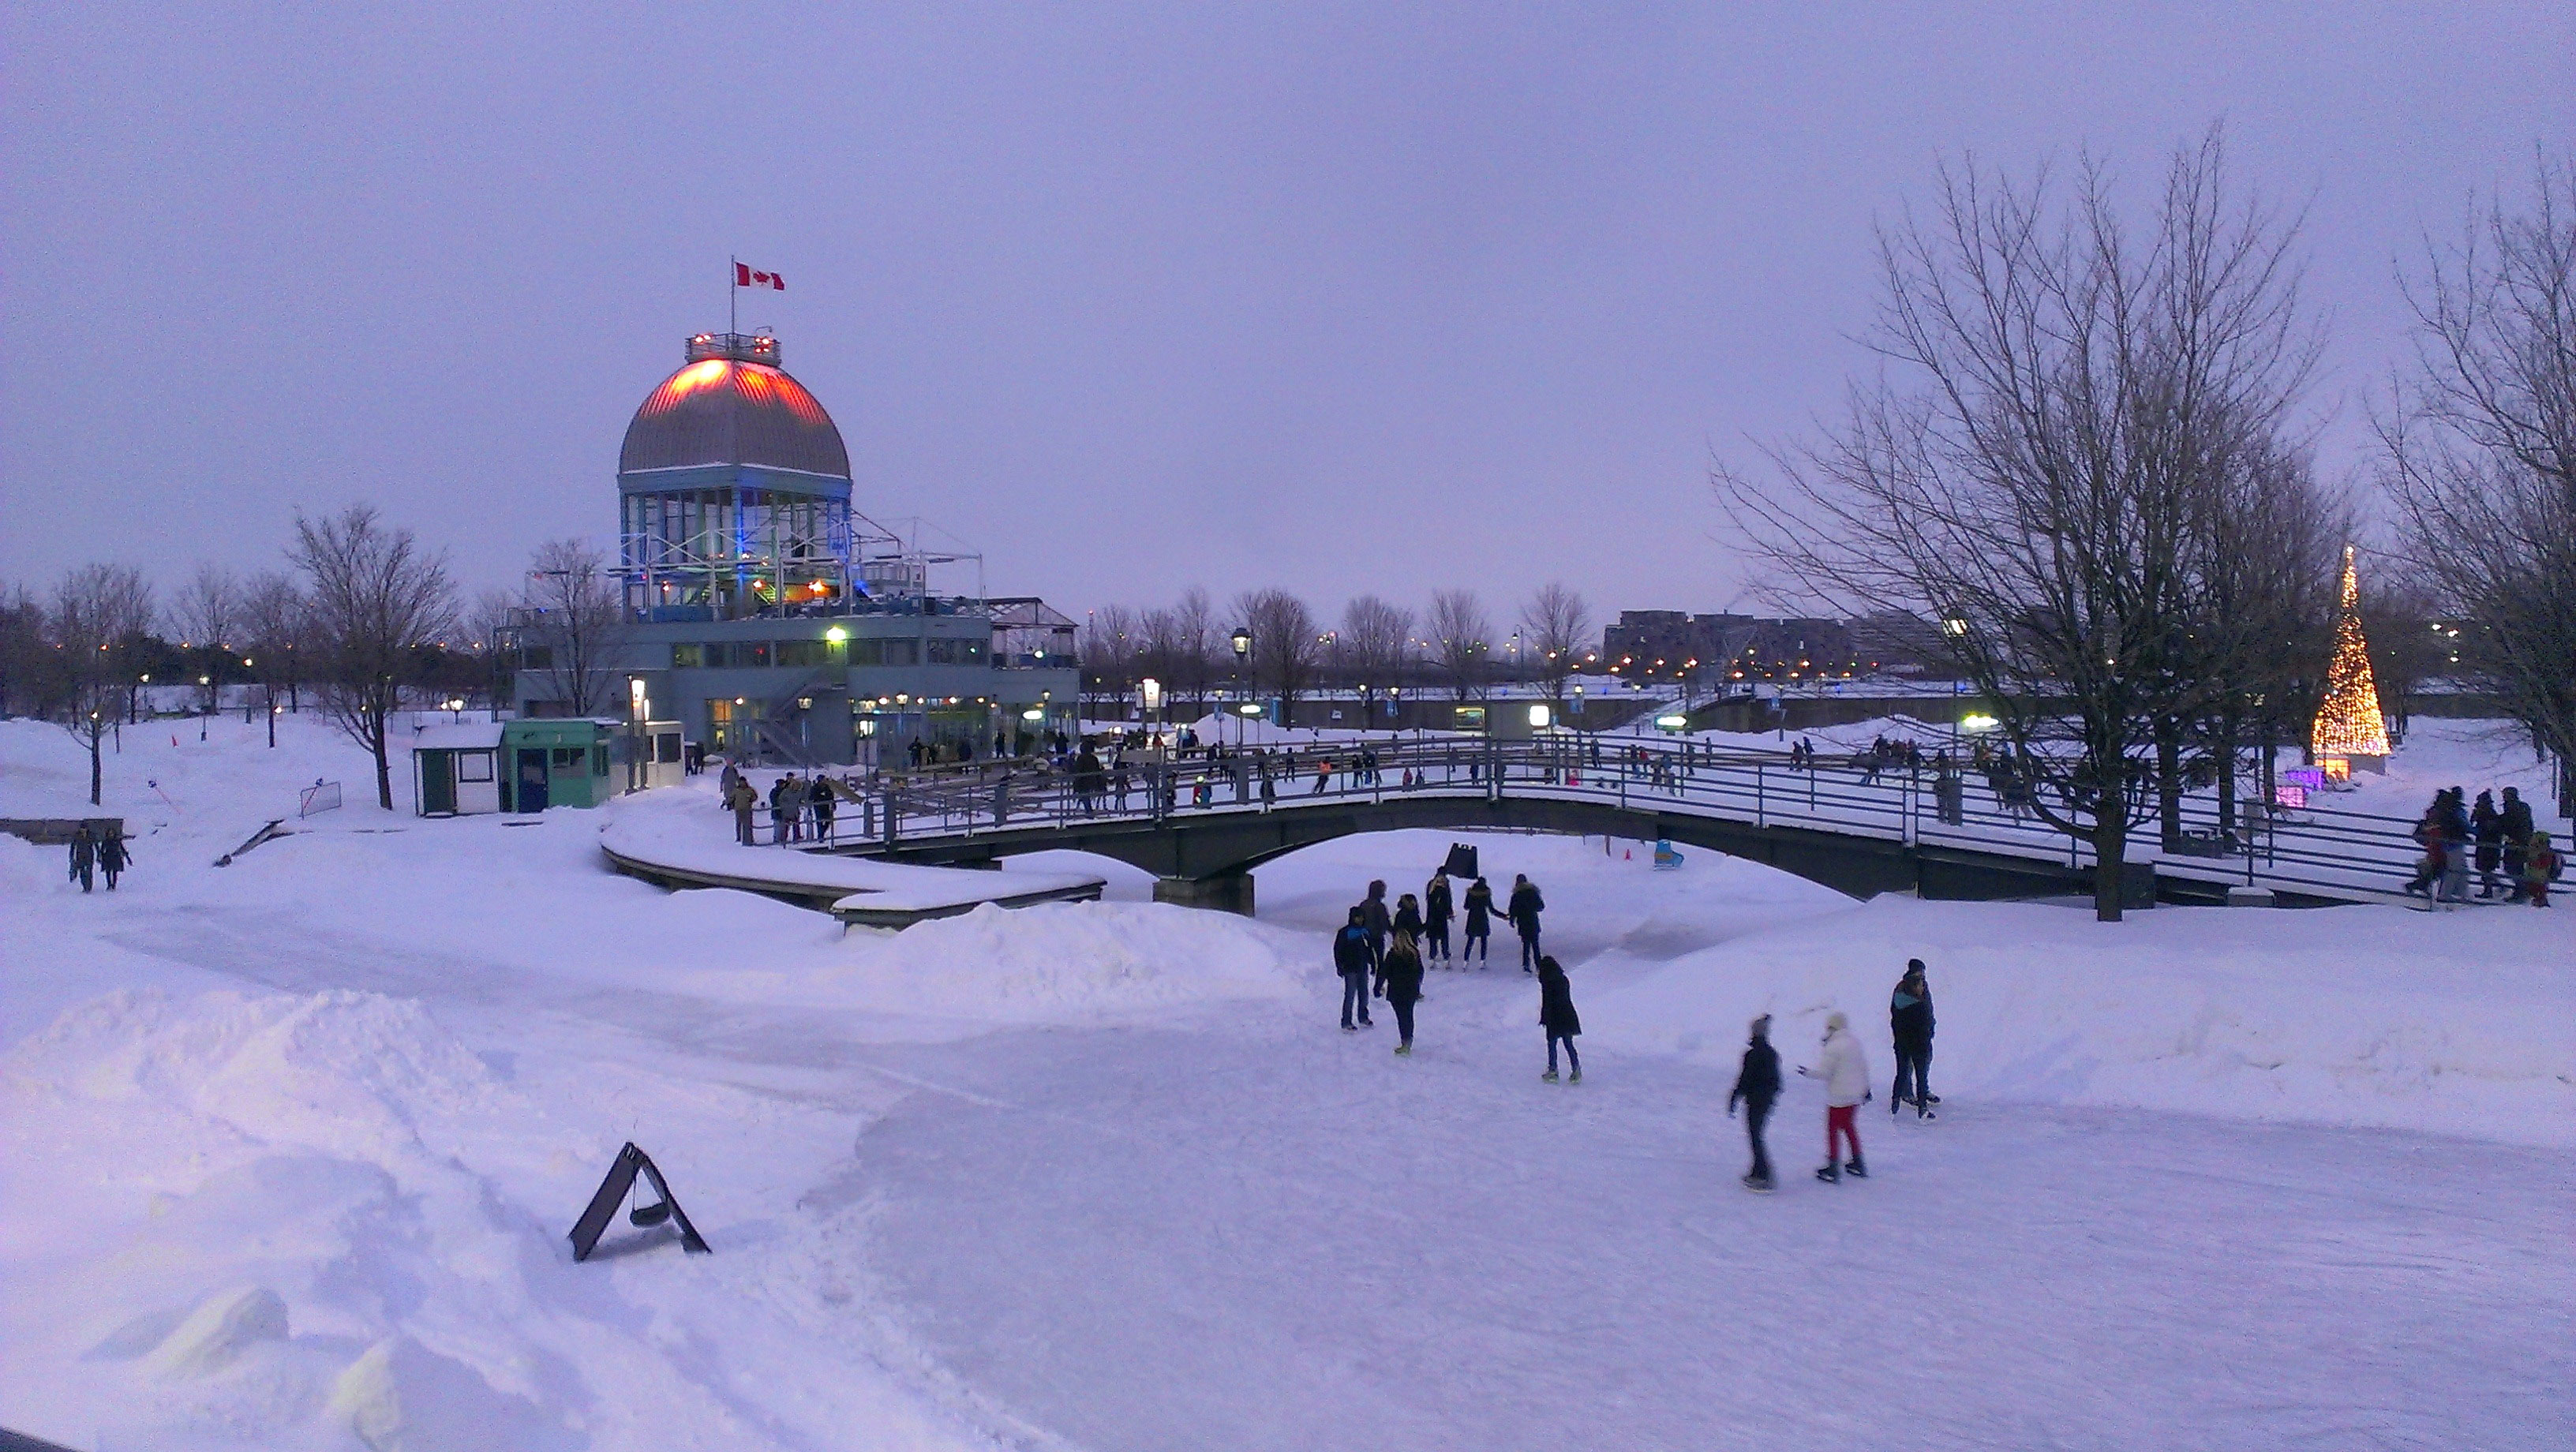 Ice Skating Rink In The Winter In Montreal Quebec Canada 